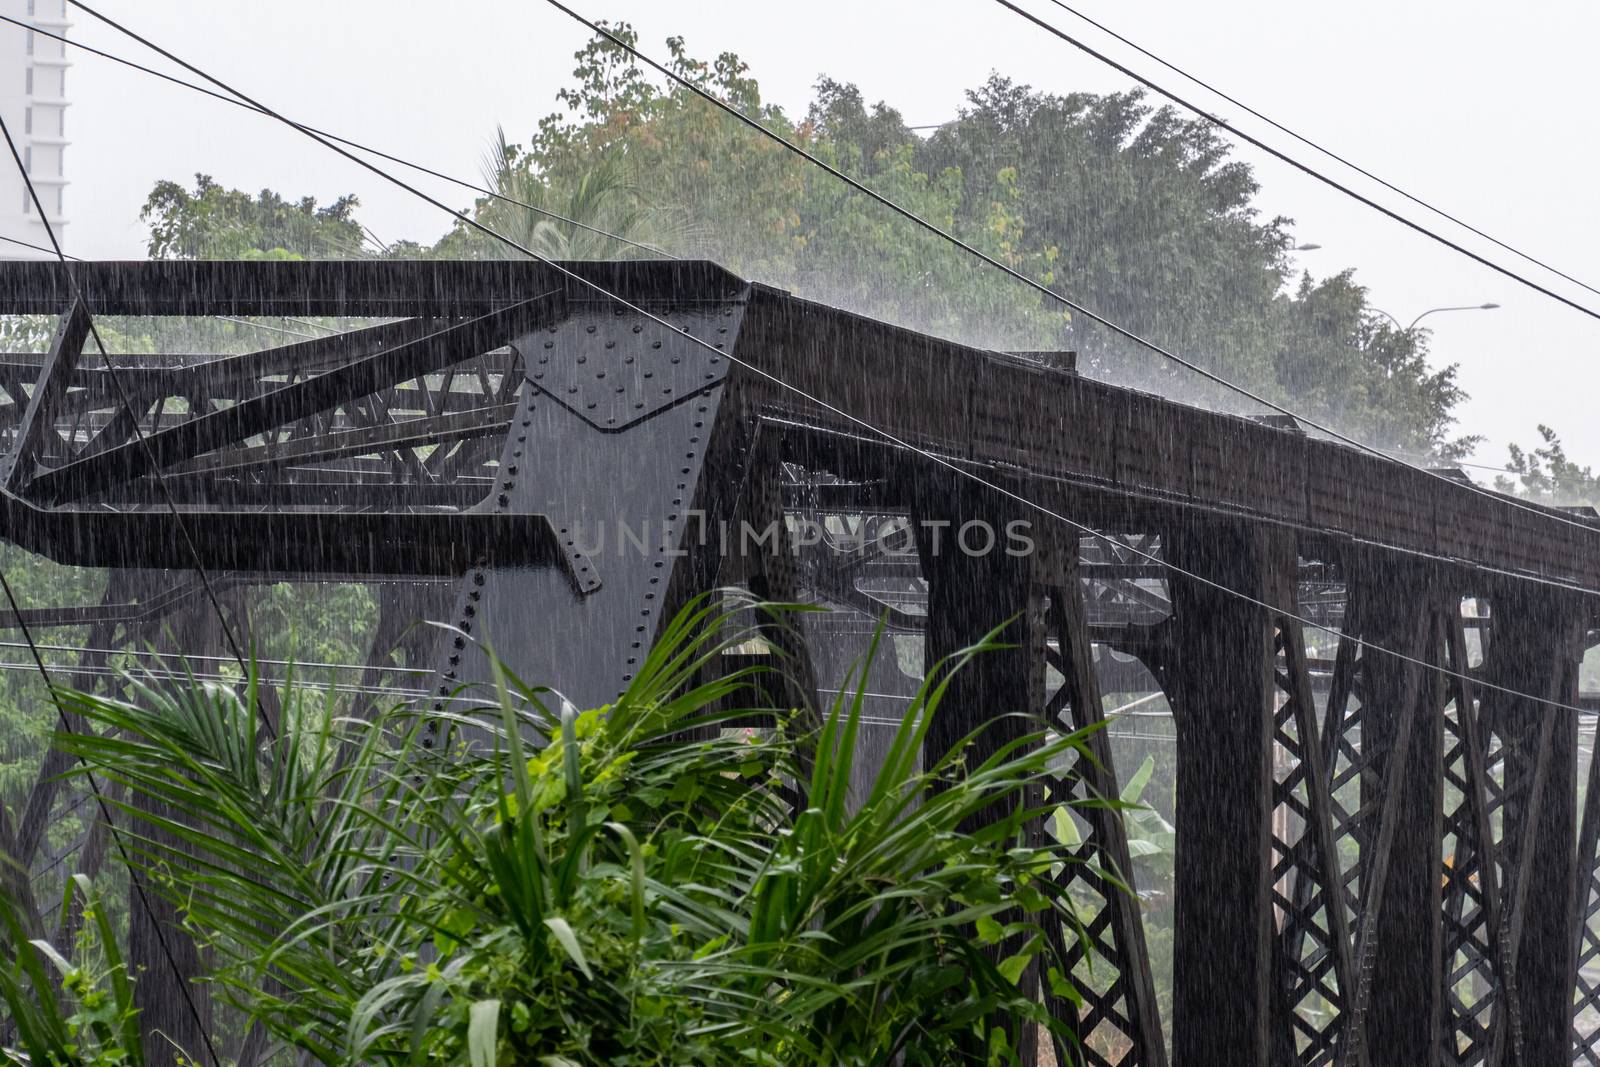 Heavy rainfall hitting steel structure during monsoon season in Malaysia by MXW_Stock